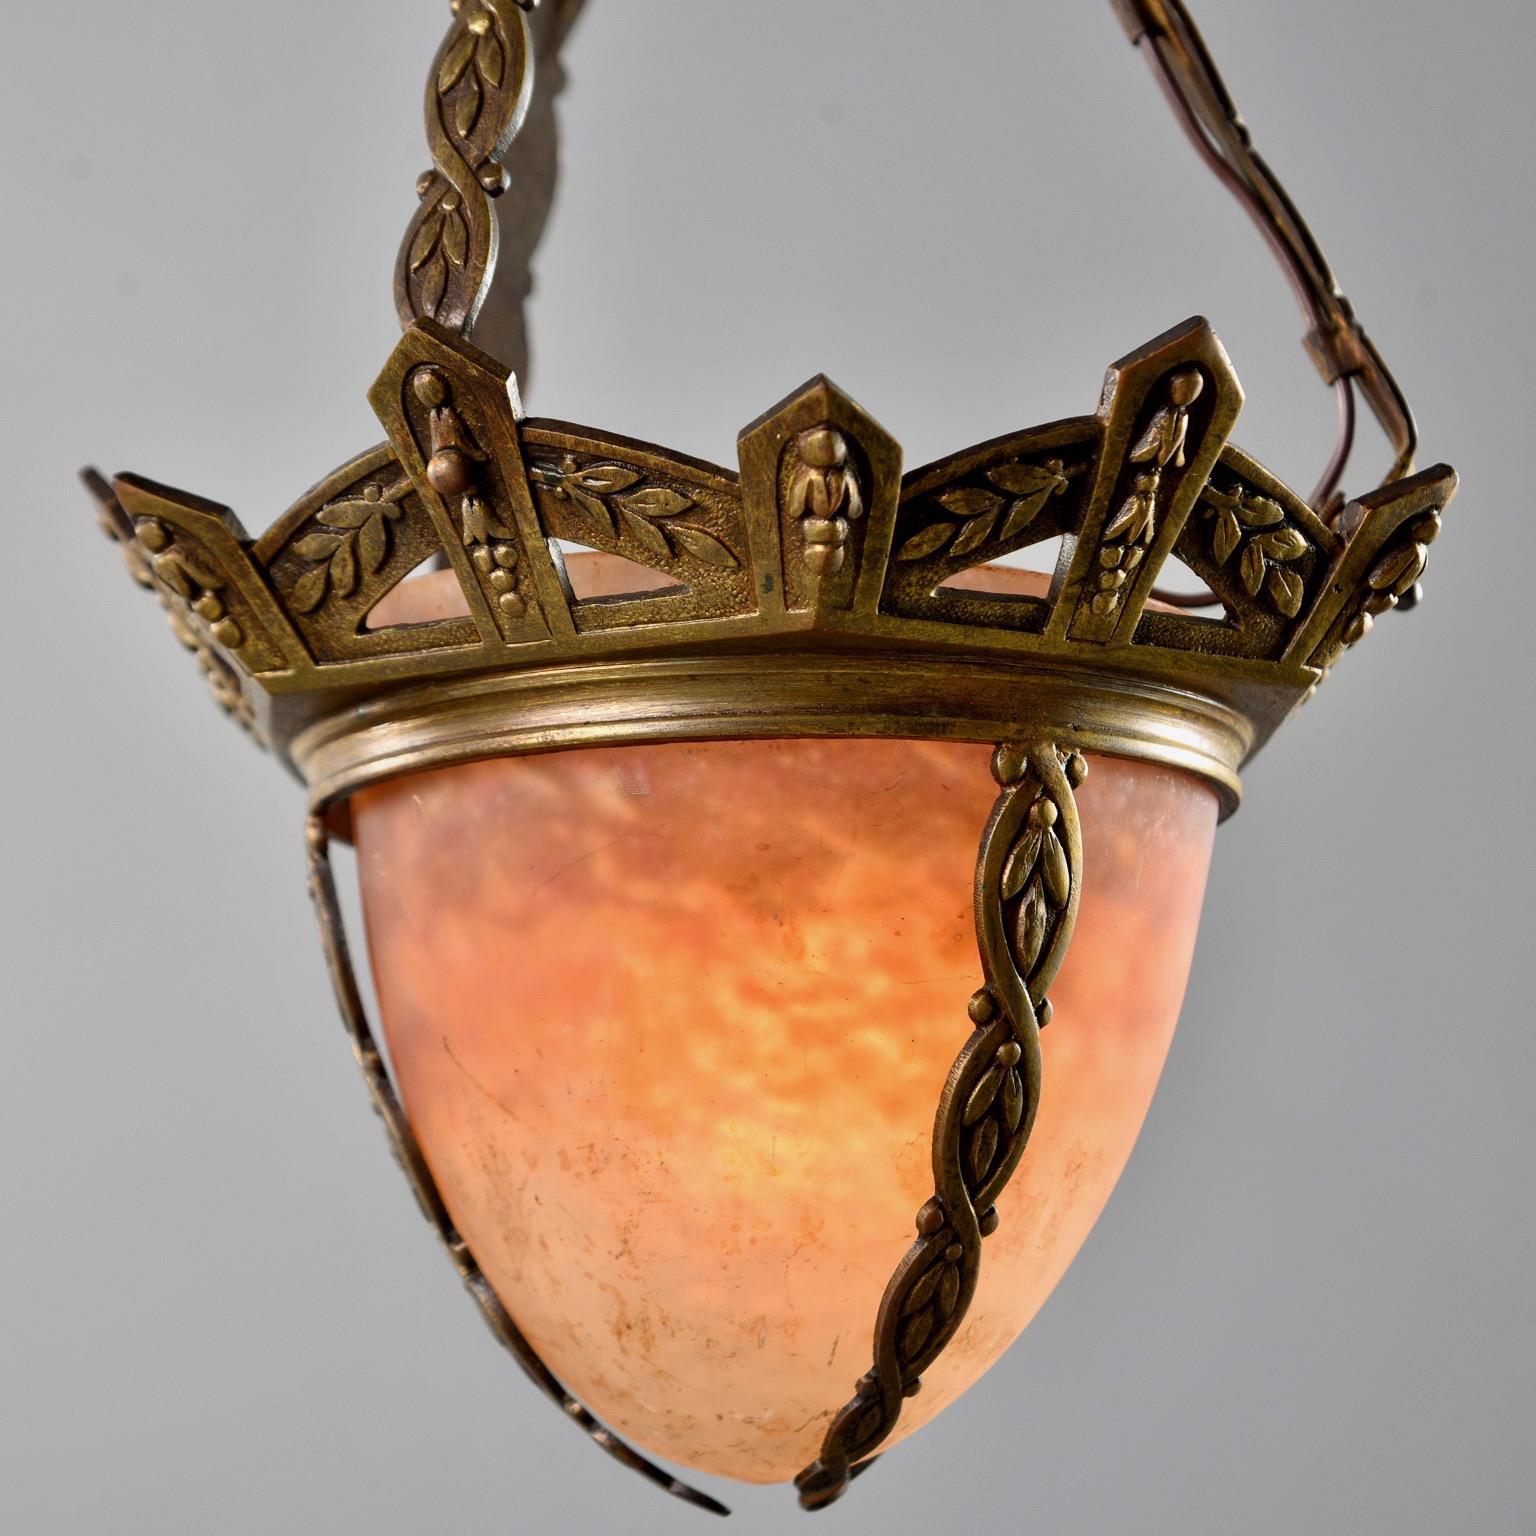 Small hanging fixture has bronze frame and decorative chain with Muller glass globe, circa 1930s. Original canopy included. Single standard sized socket. New wiring for US electrical standards.